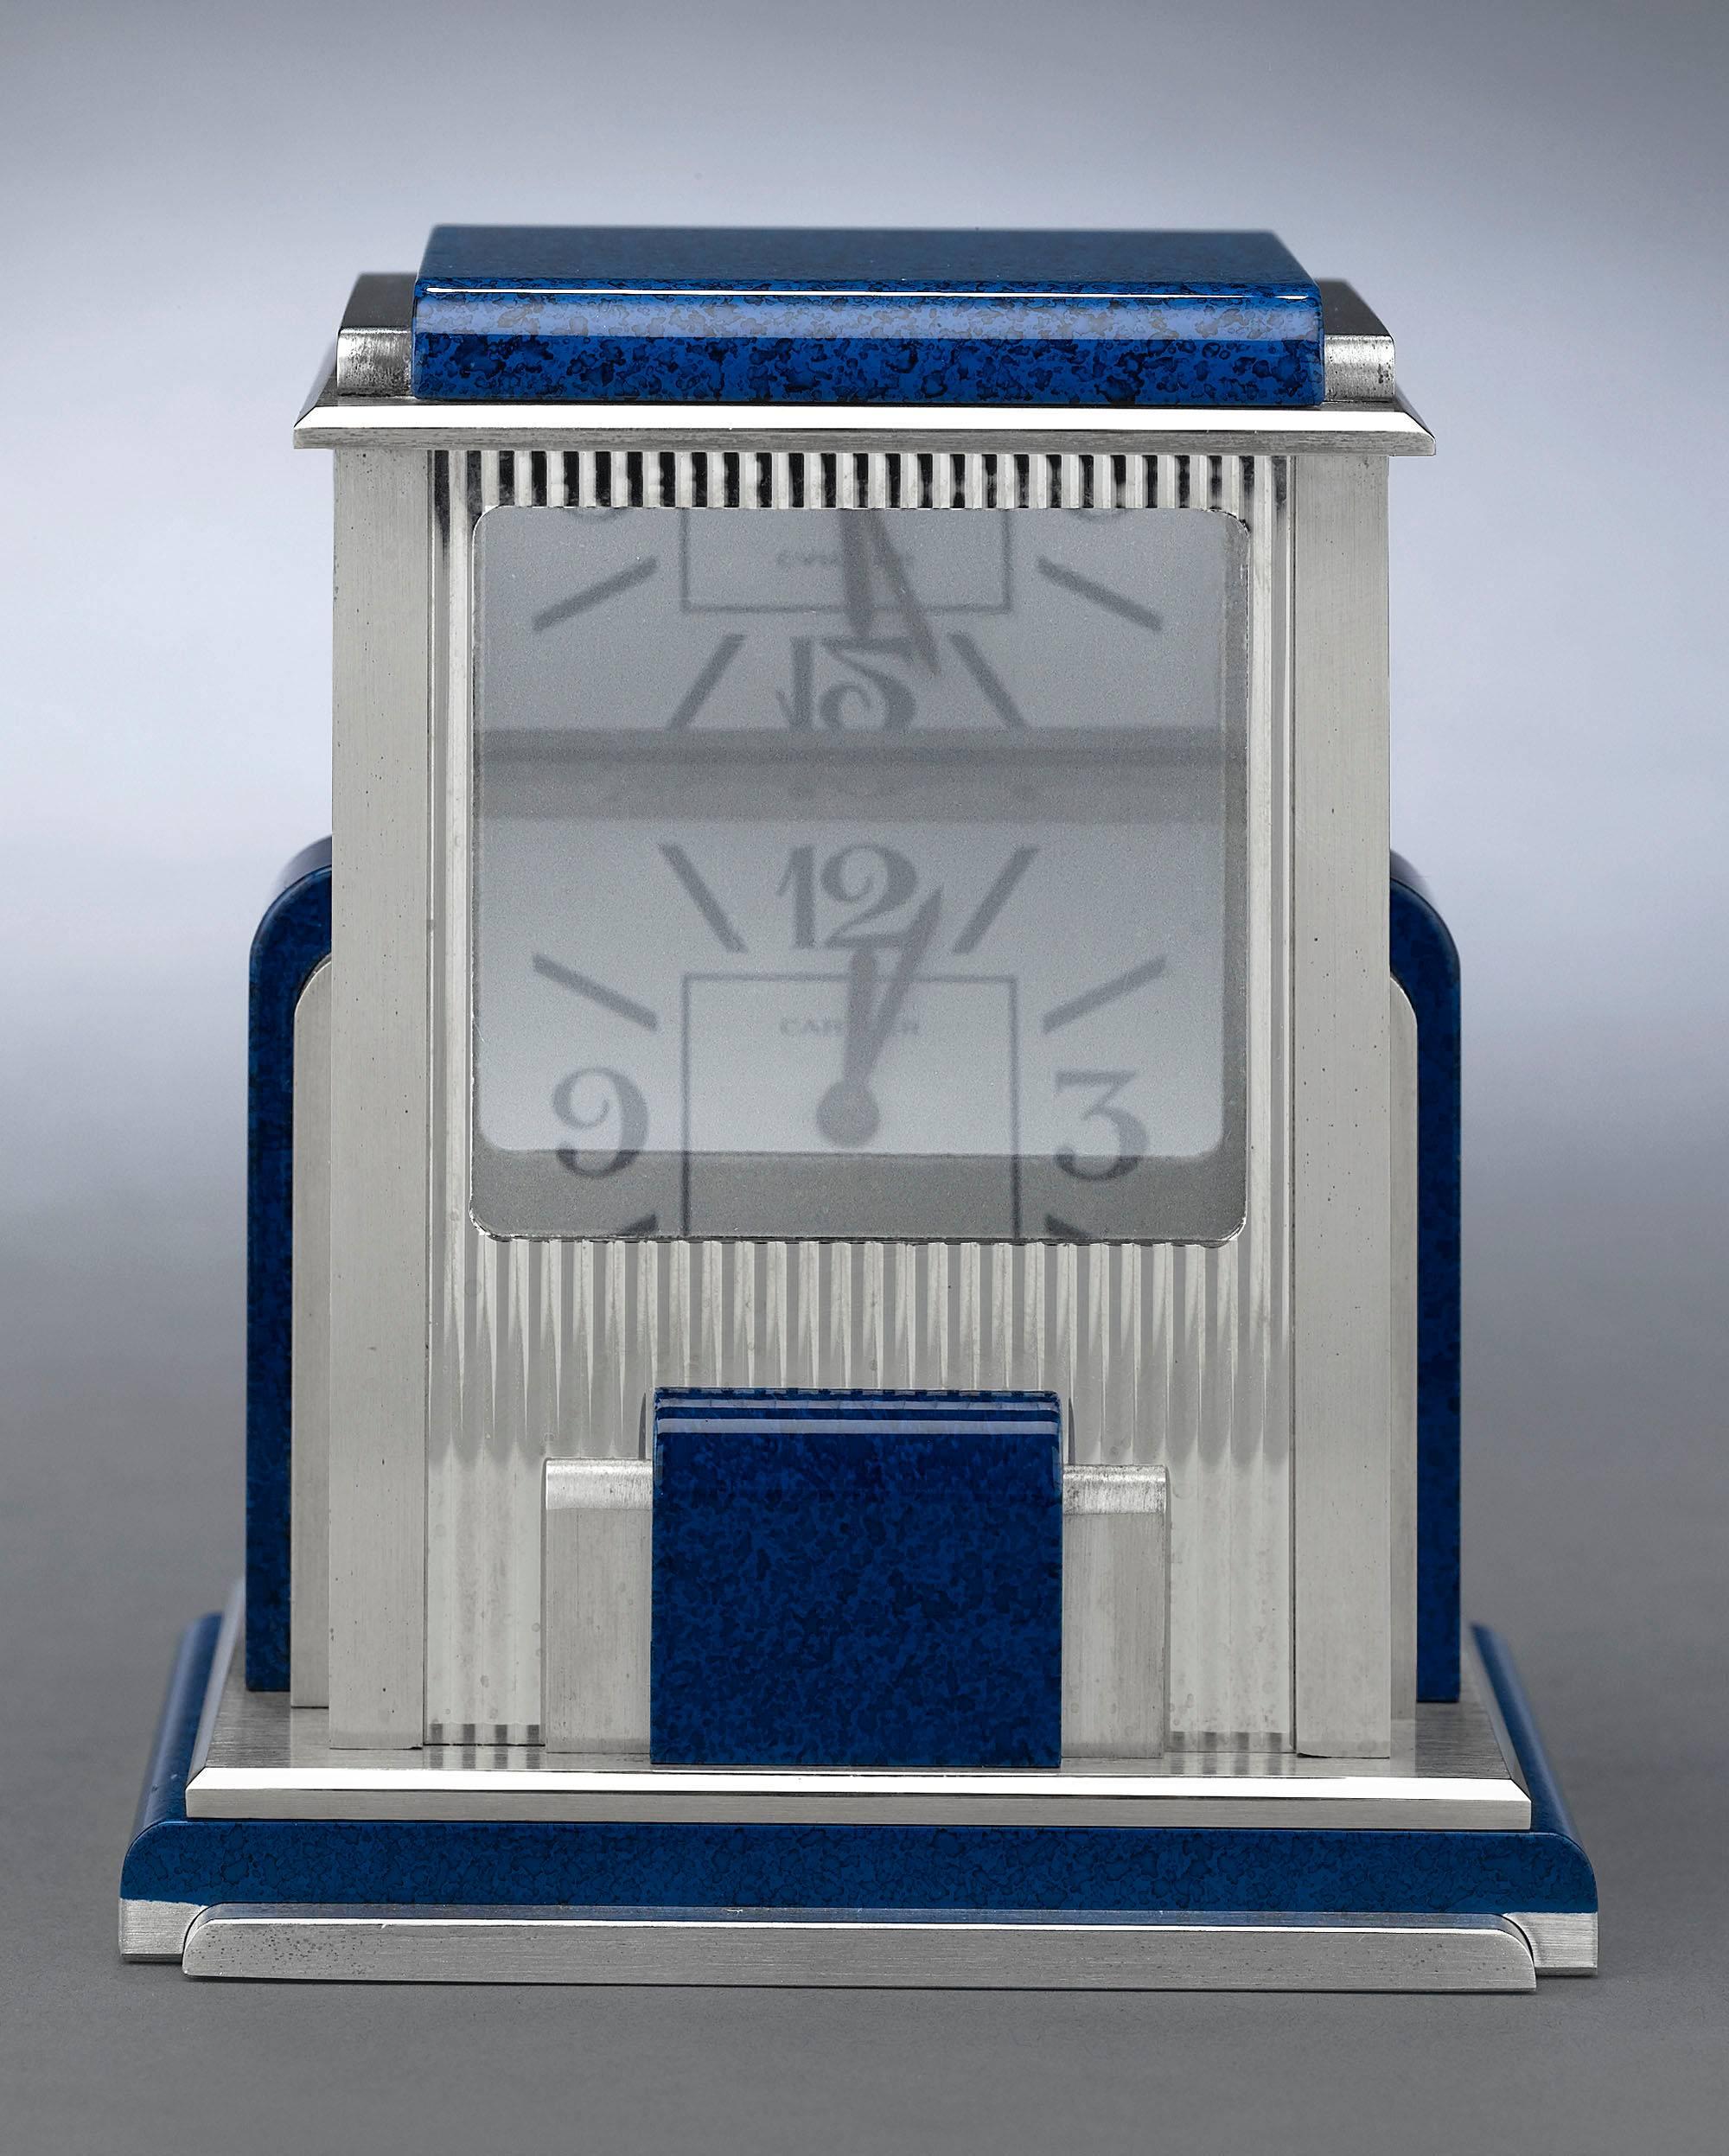 A work of exceptional engineering and stylish artistry, this mystery clock by Cartier is known as a “prism” clock. Crafted in a sleek Art Deco style with simulated lapis lazuli accents, this silver-plated desk clock is equipped with a set of quartz